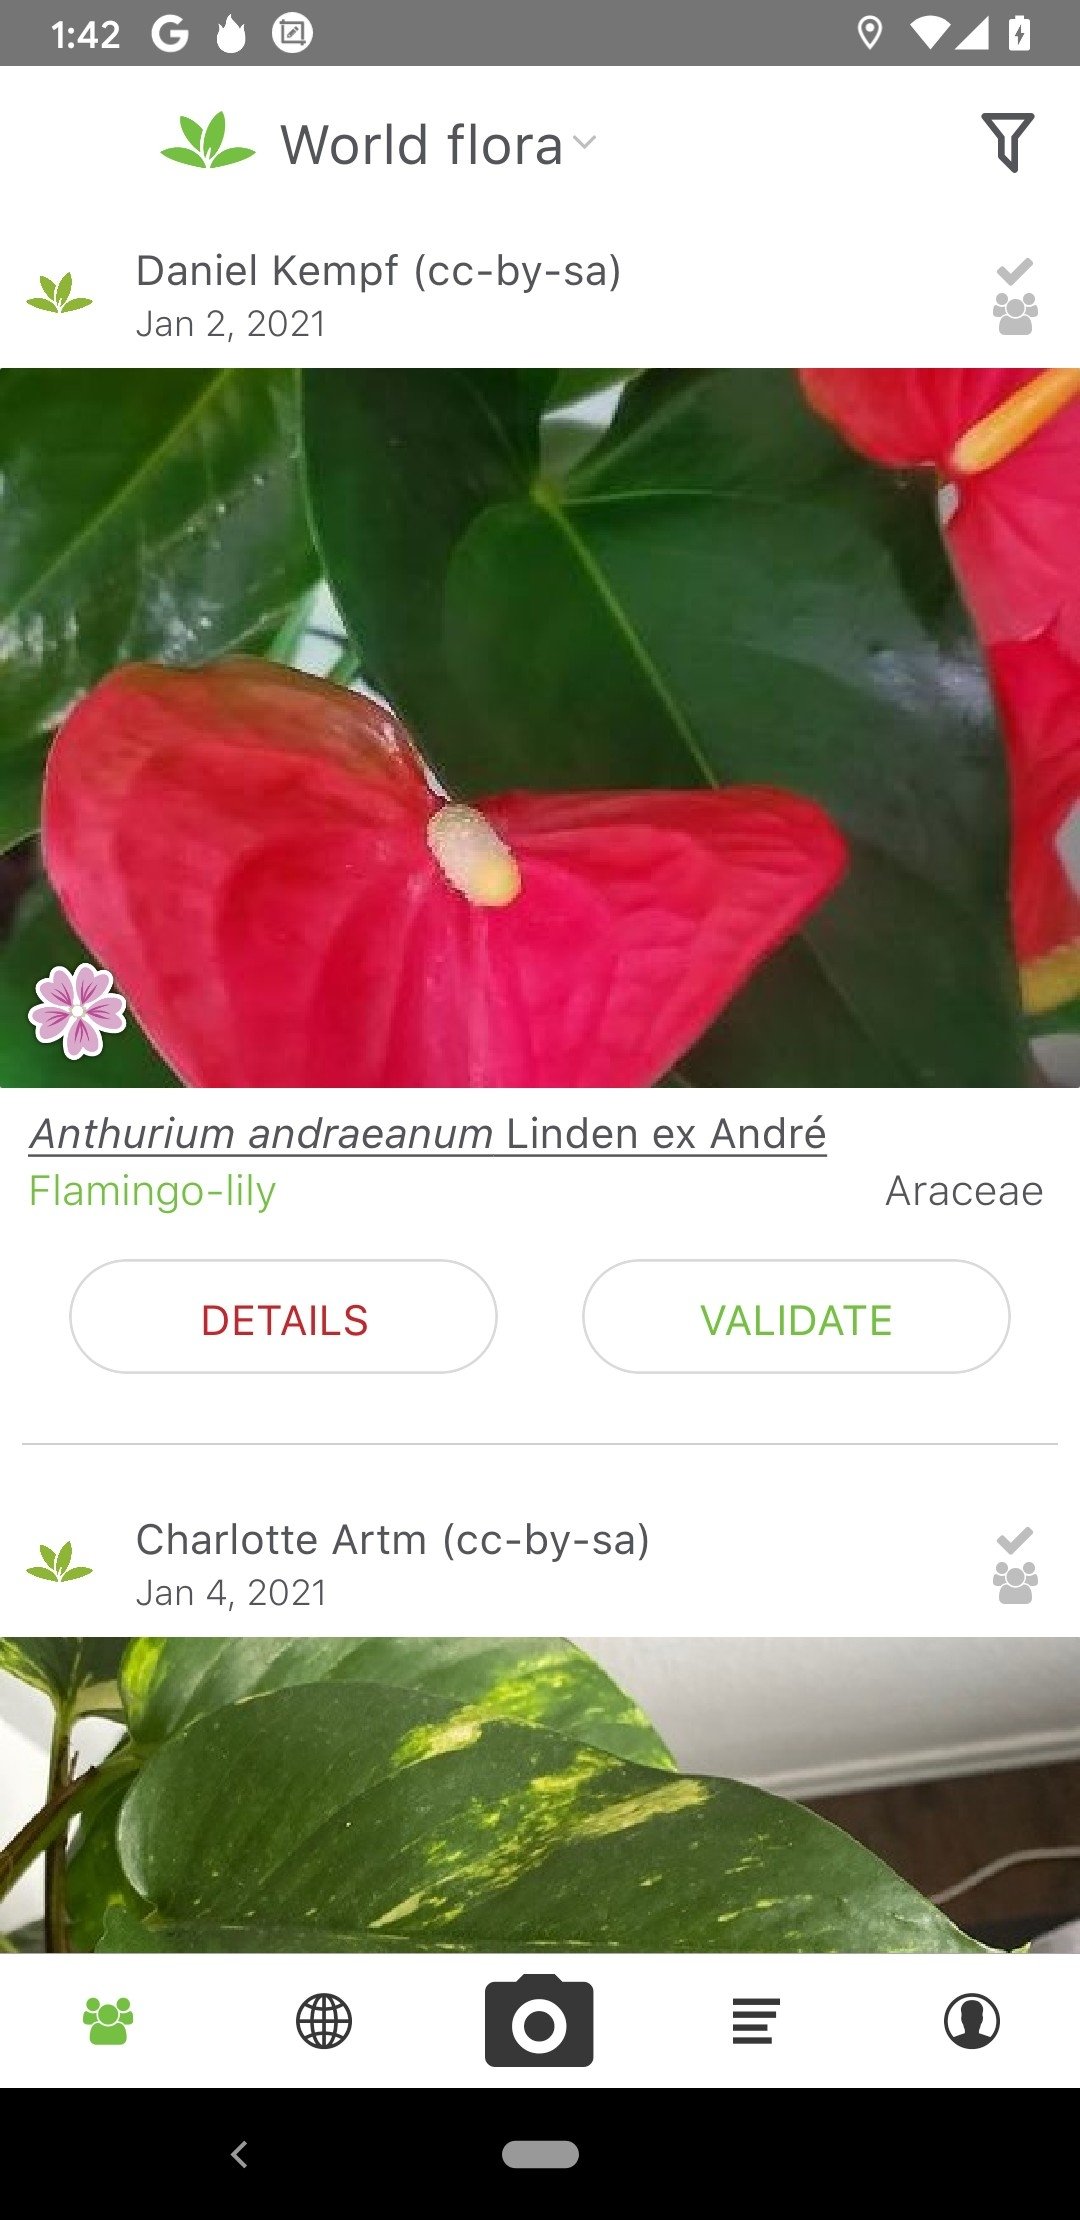 plantnet 3.4.4 - download for android apk free